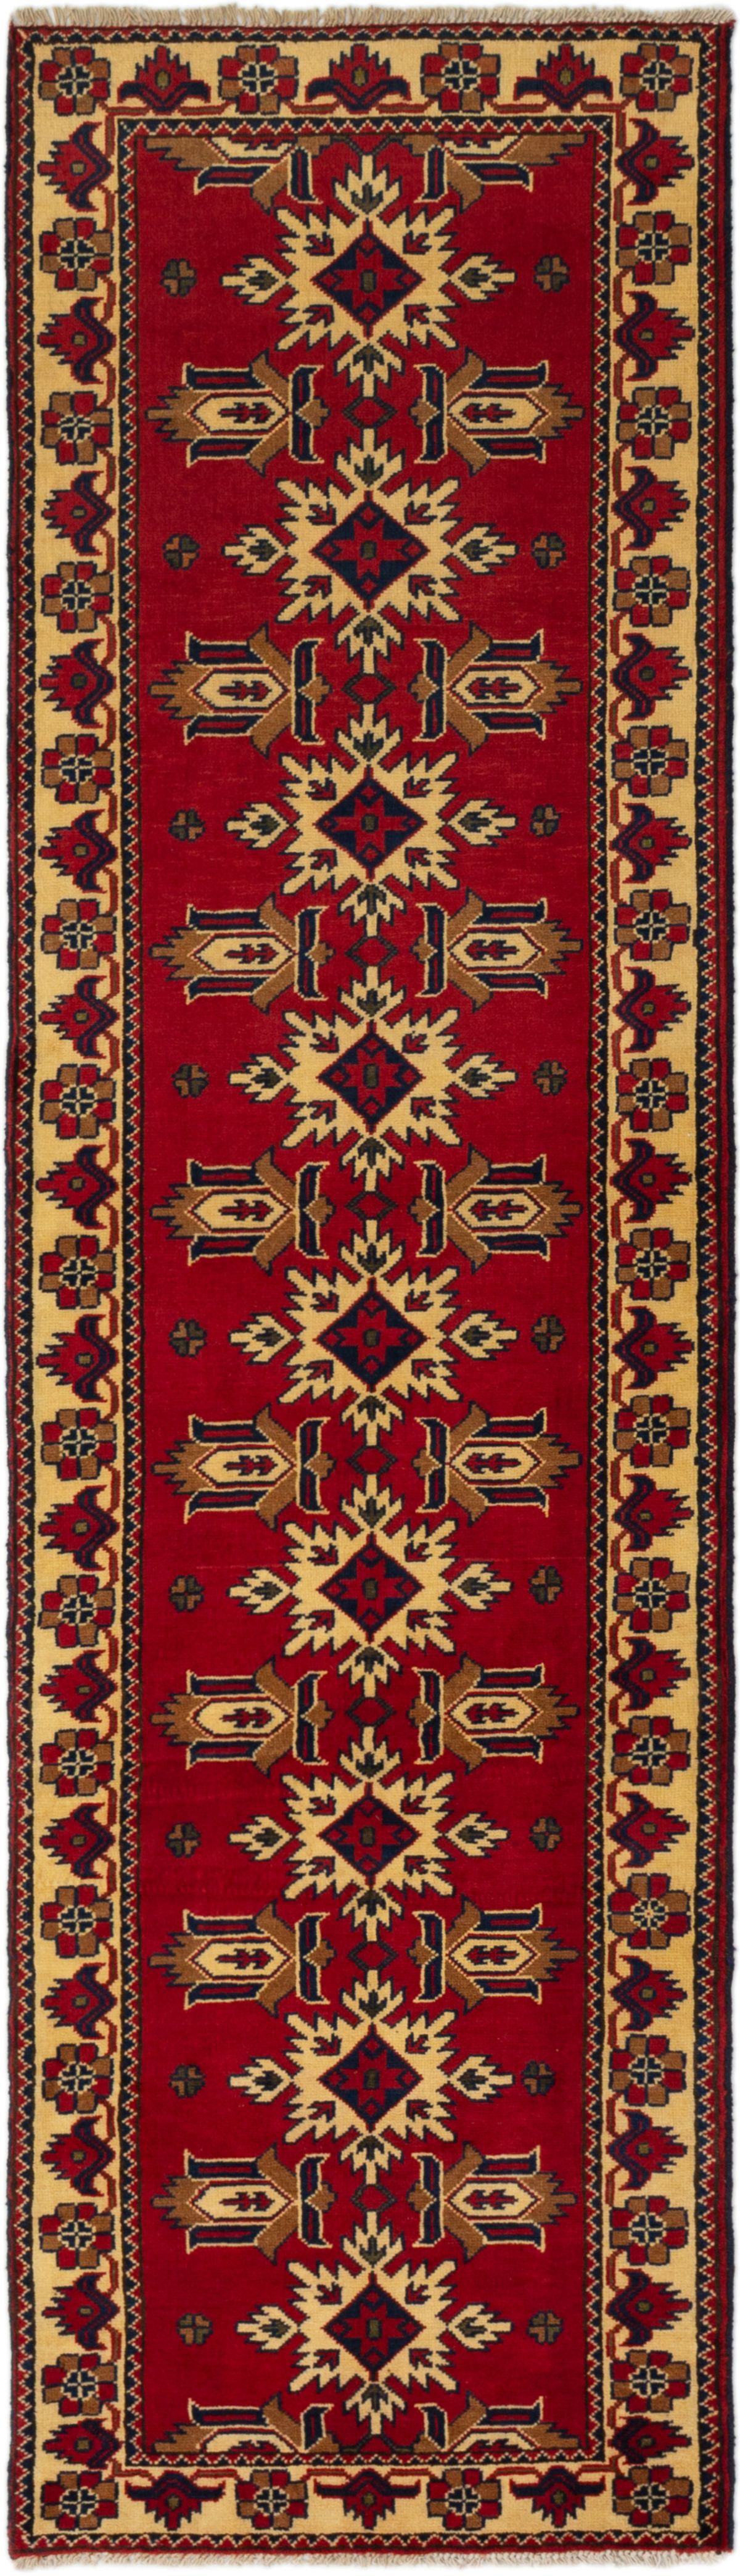 Hand-knotted Finest Kargahi Red Wool Rug 2'9" x 9'9" Size: 2'9" x 9'9"  